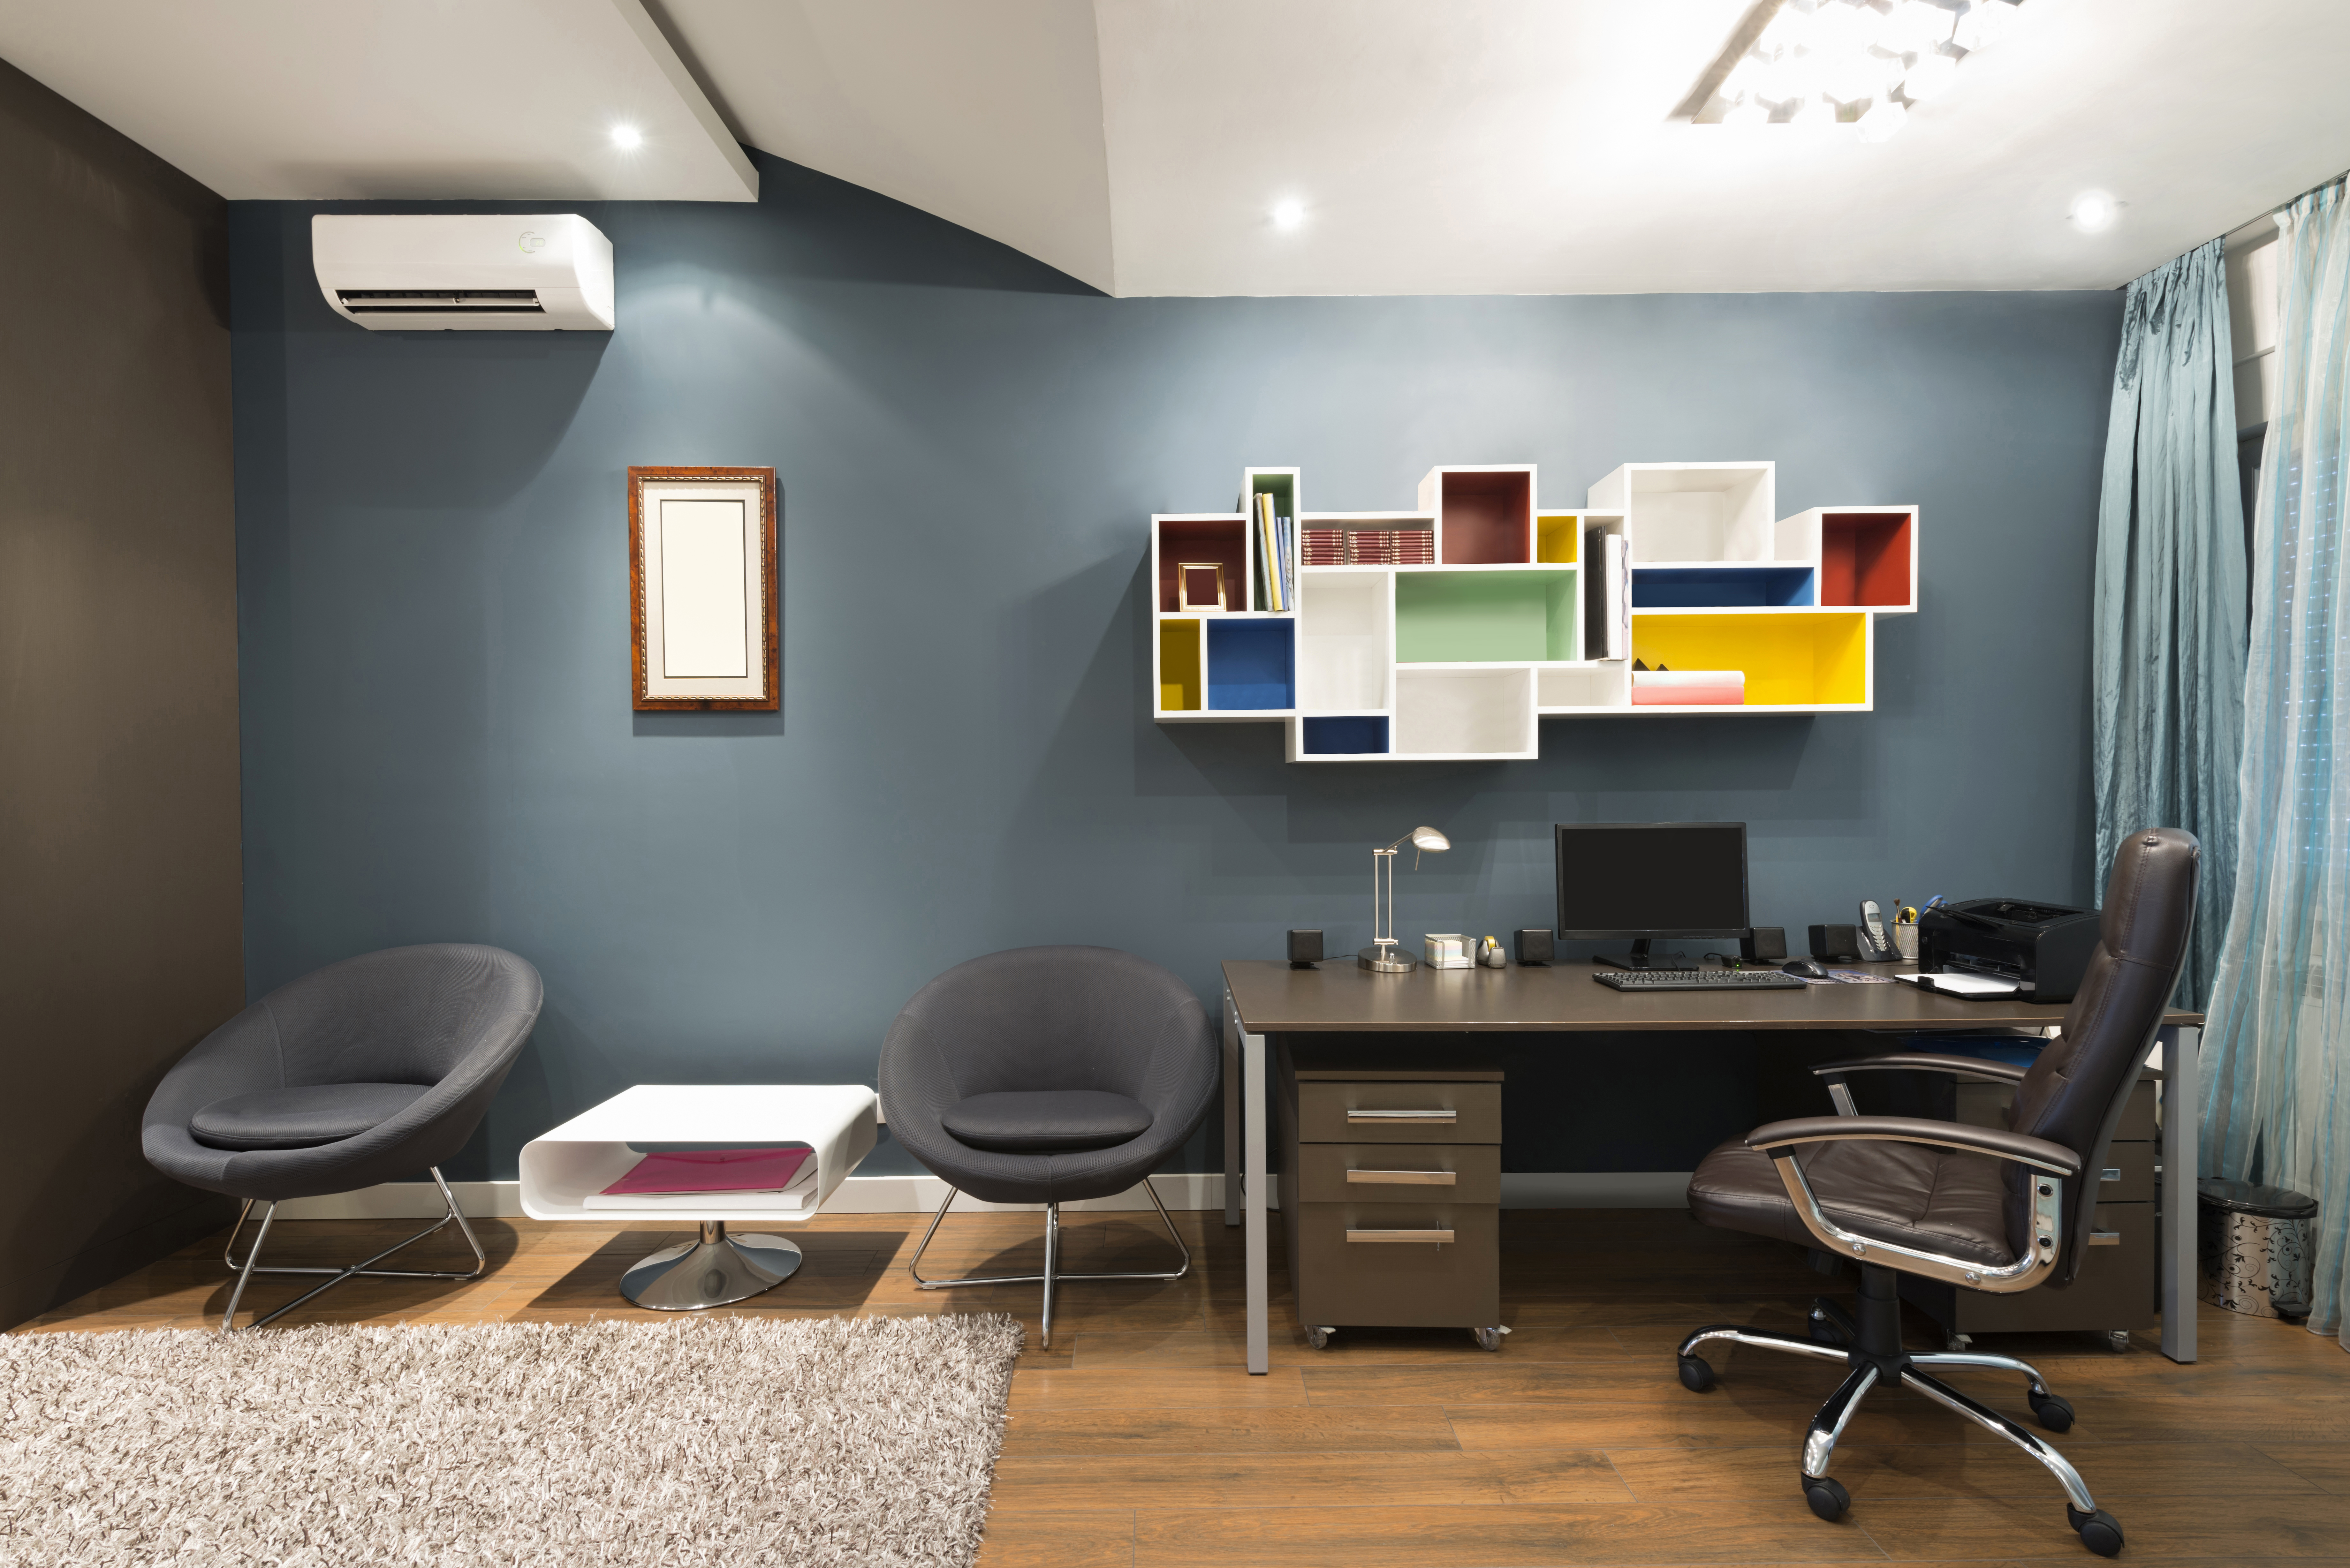 abstract study room designs 